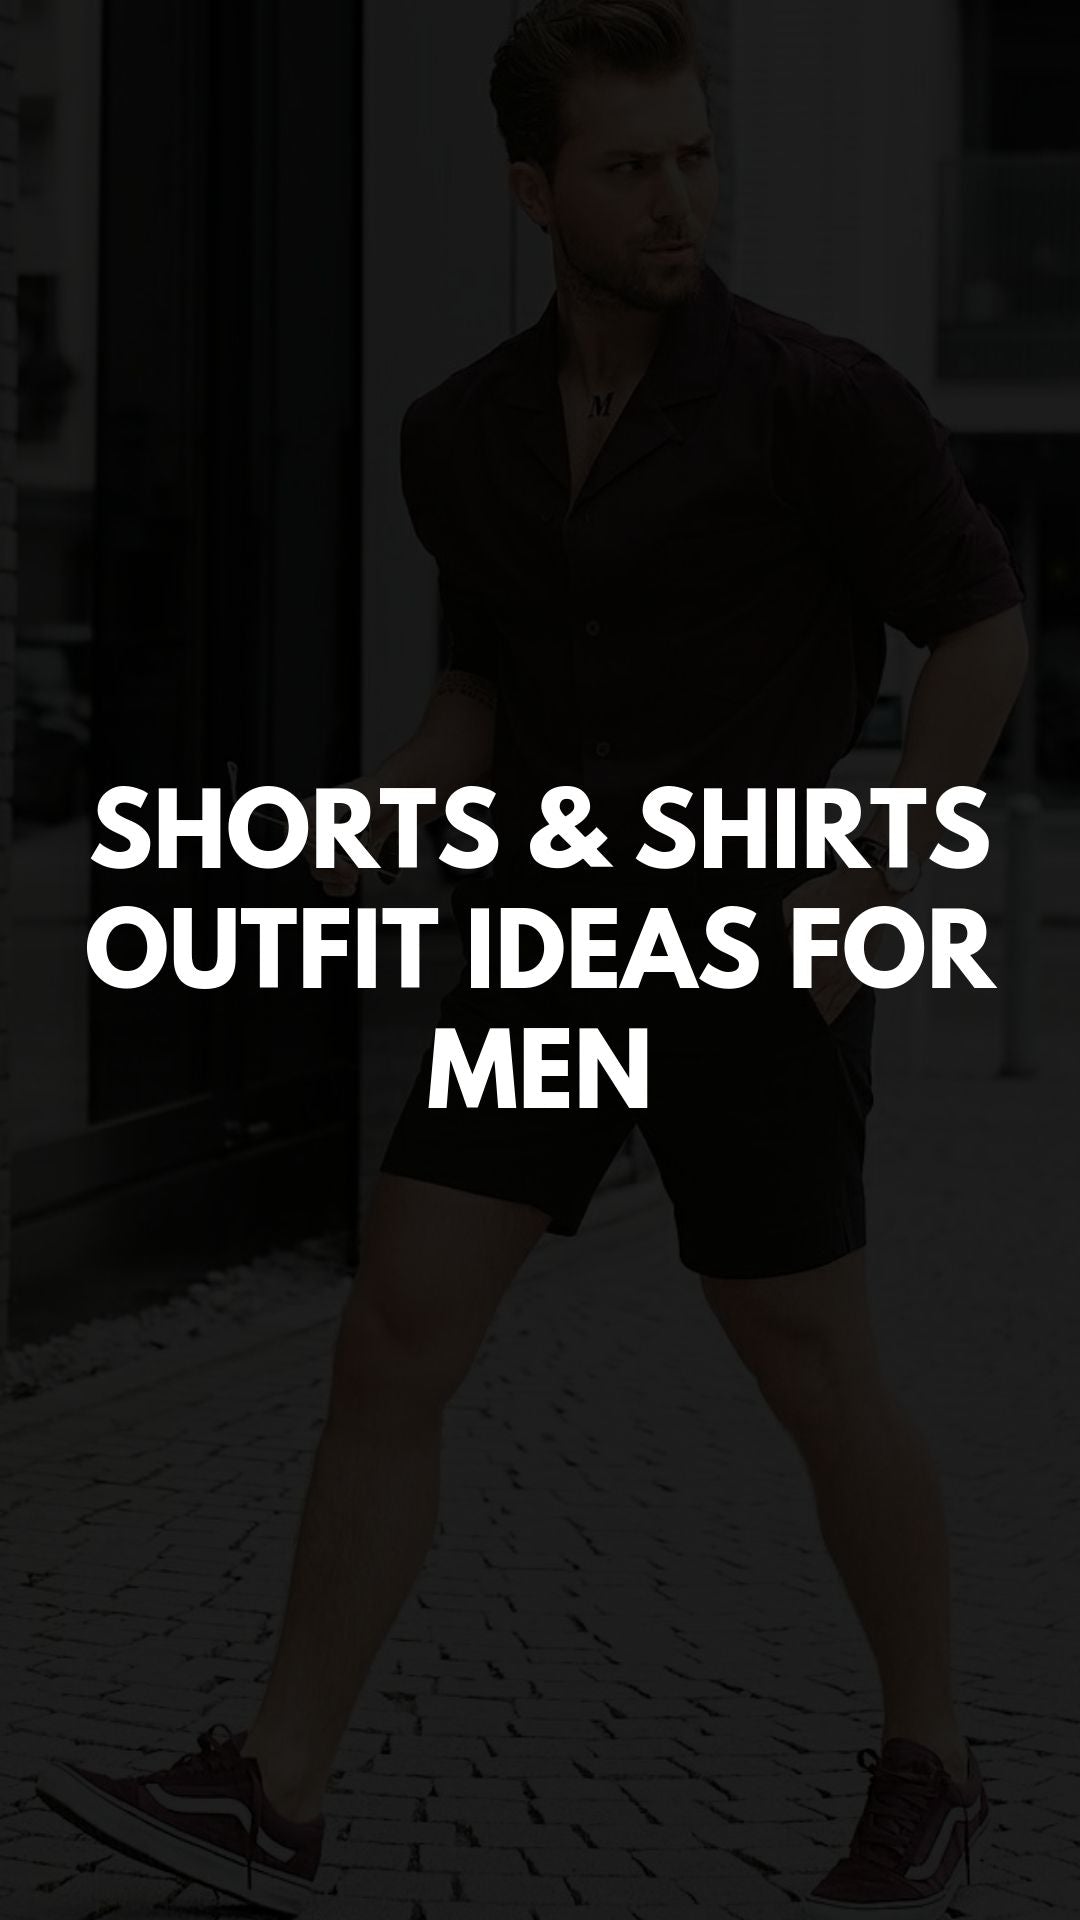 Shorts & Shirt Outfit Ideas For Men